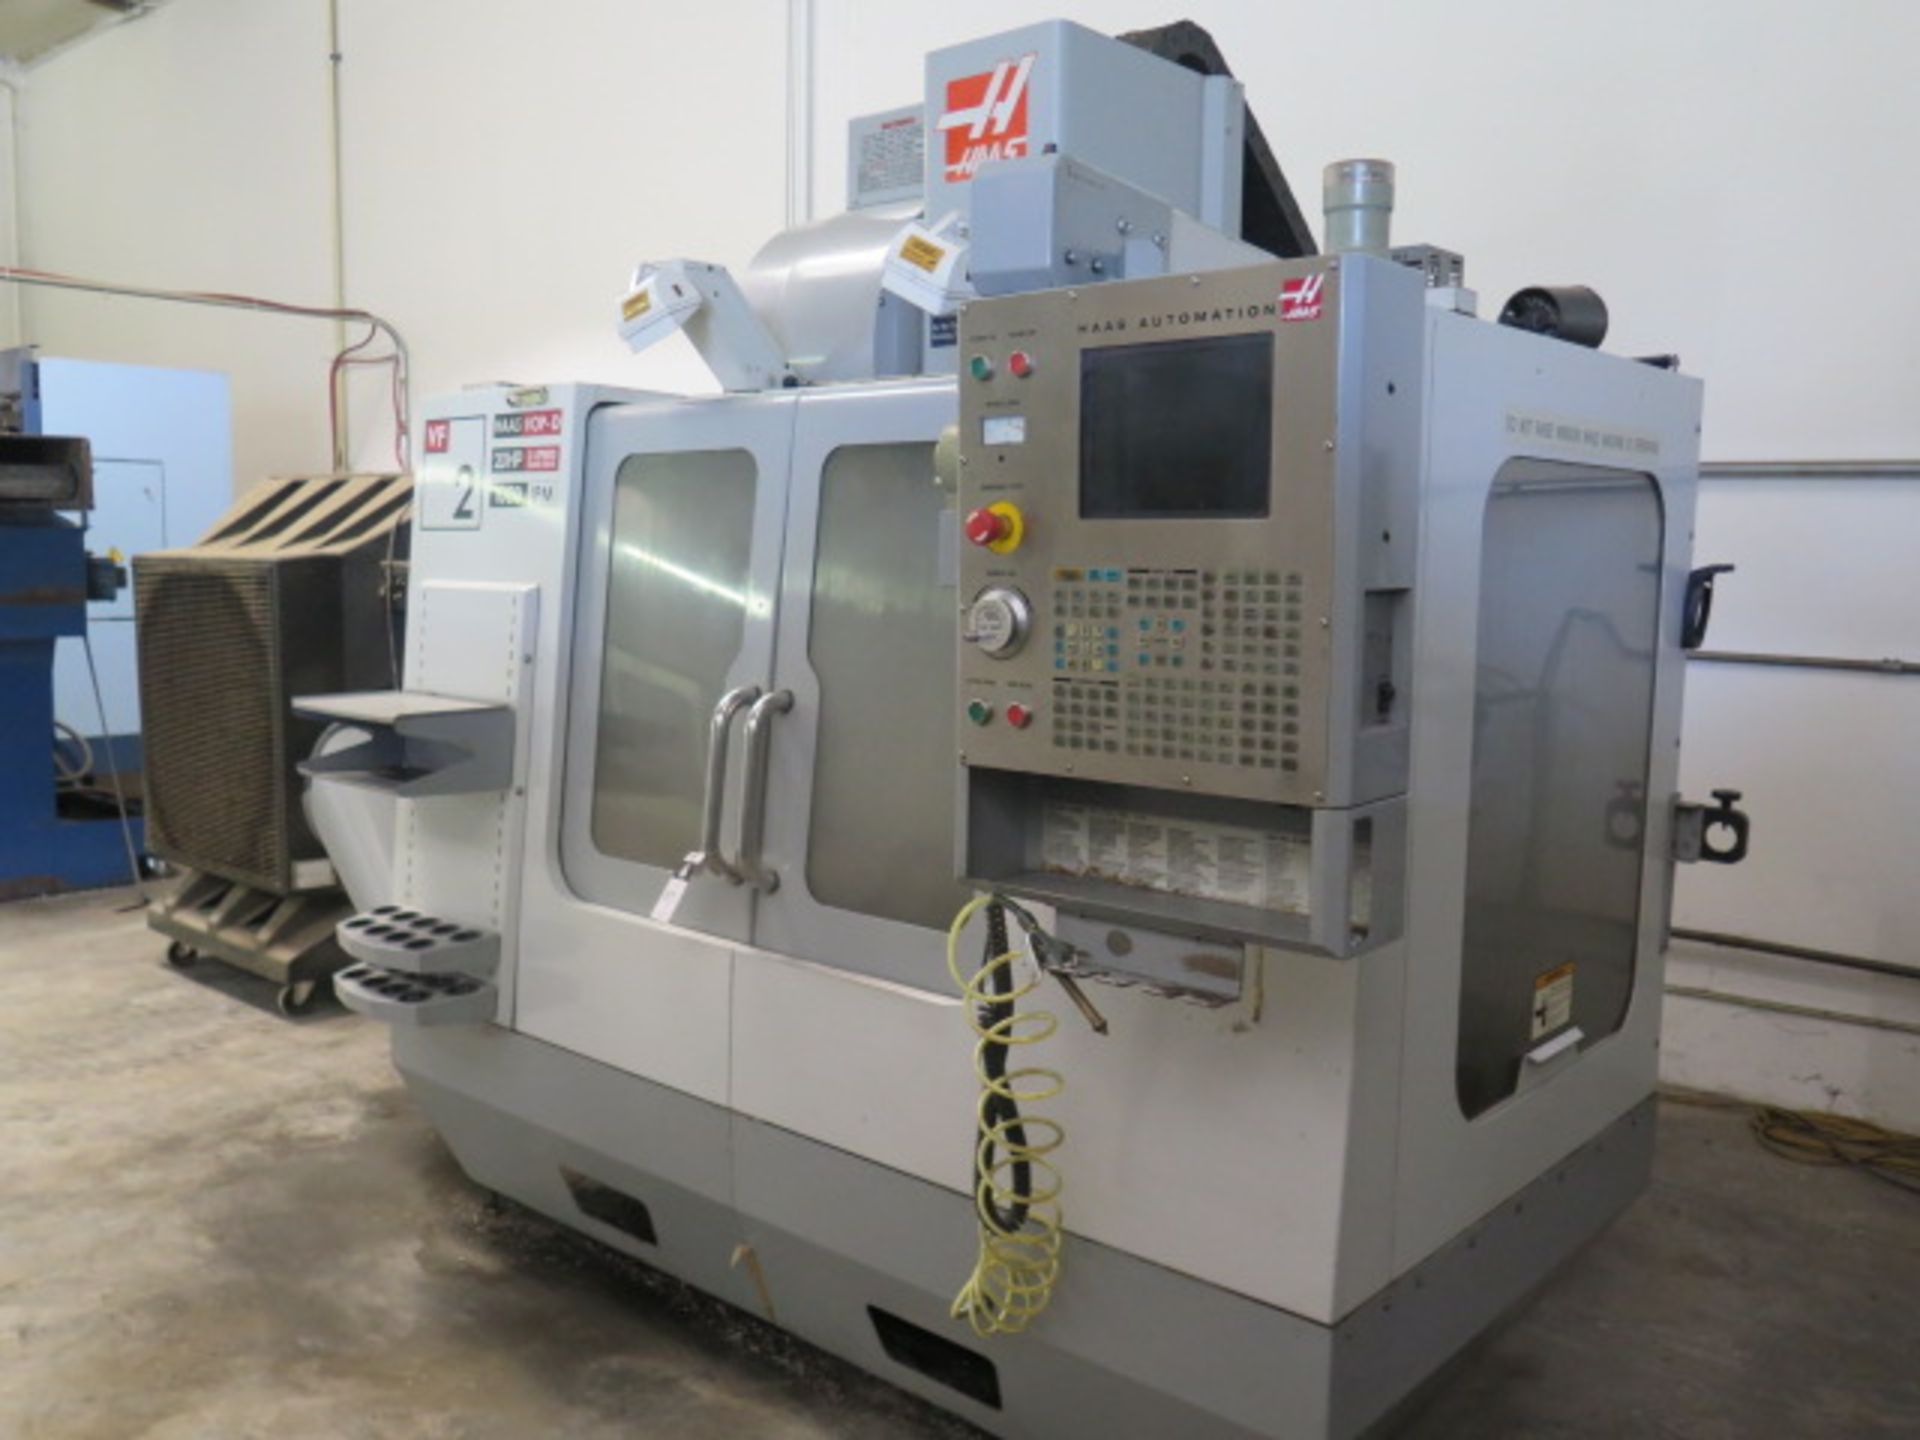 2006 Haas VF-2B 4-Axis CNC VMC s/n 48111 w/ Haas Controls, Hand Wheel, 24-Station ATC, SOLD AS IS - Image 3 of 18